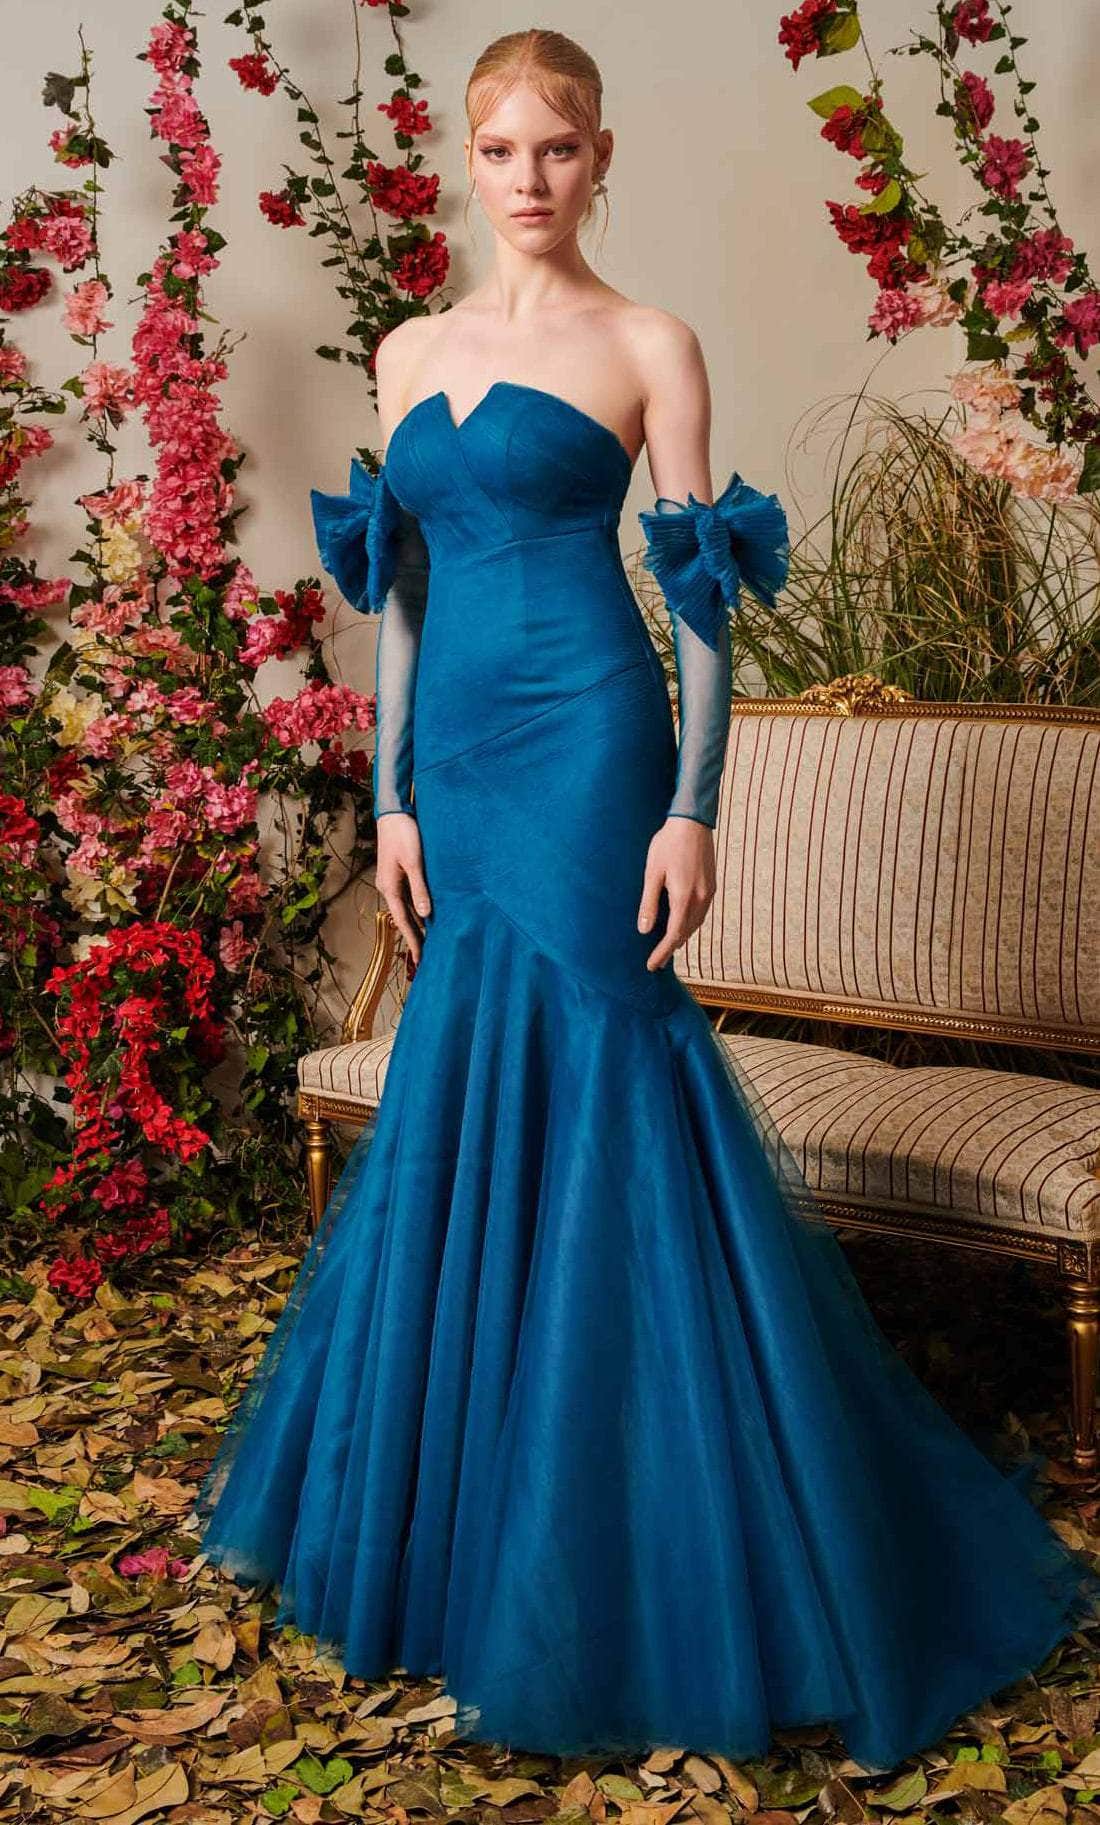 MNM Couture N0486 - Strapless Fitted Mermaid Gown
